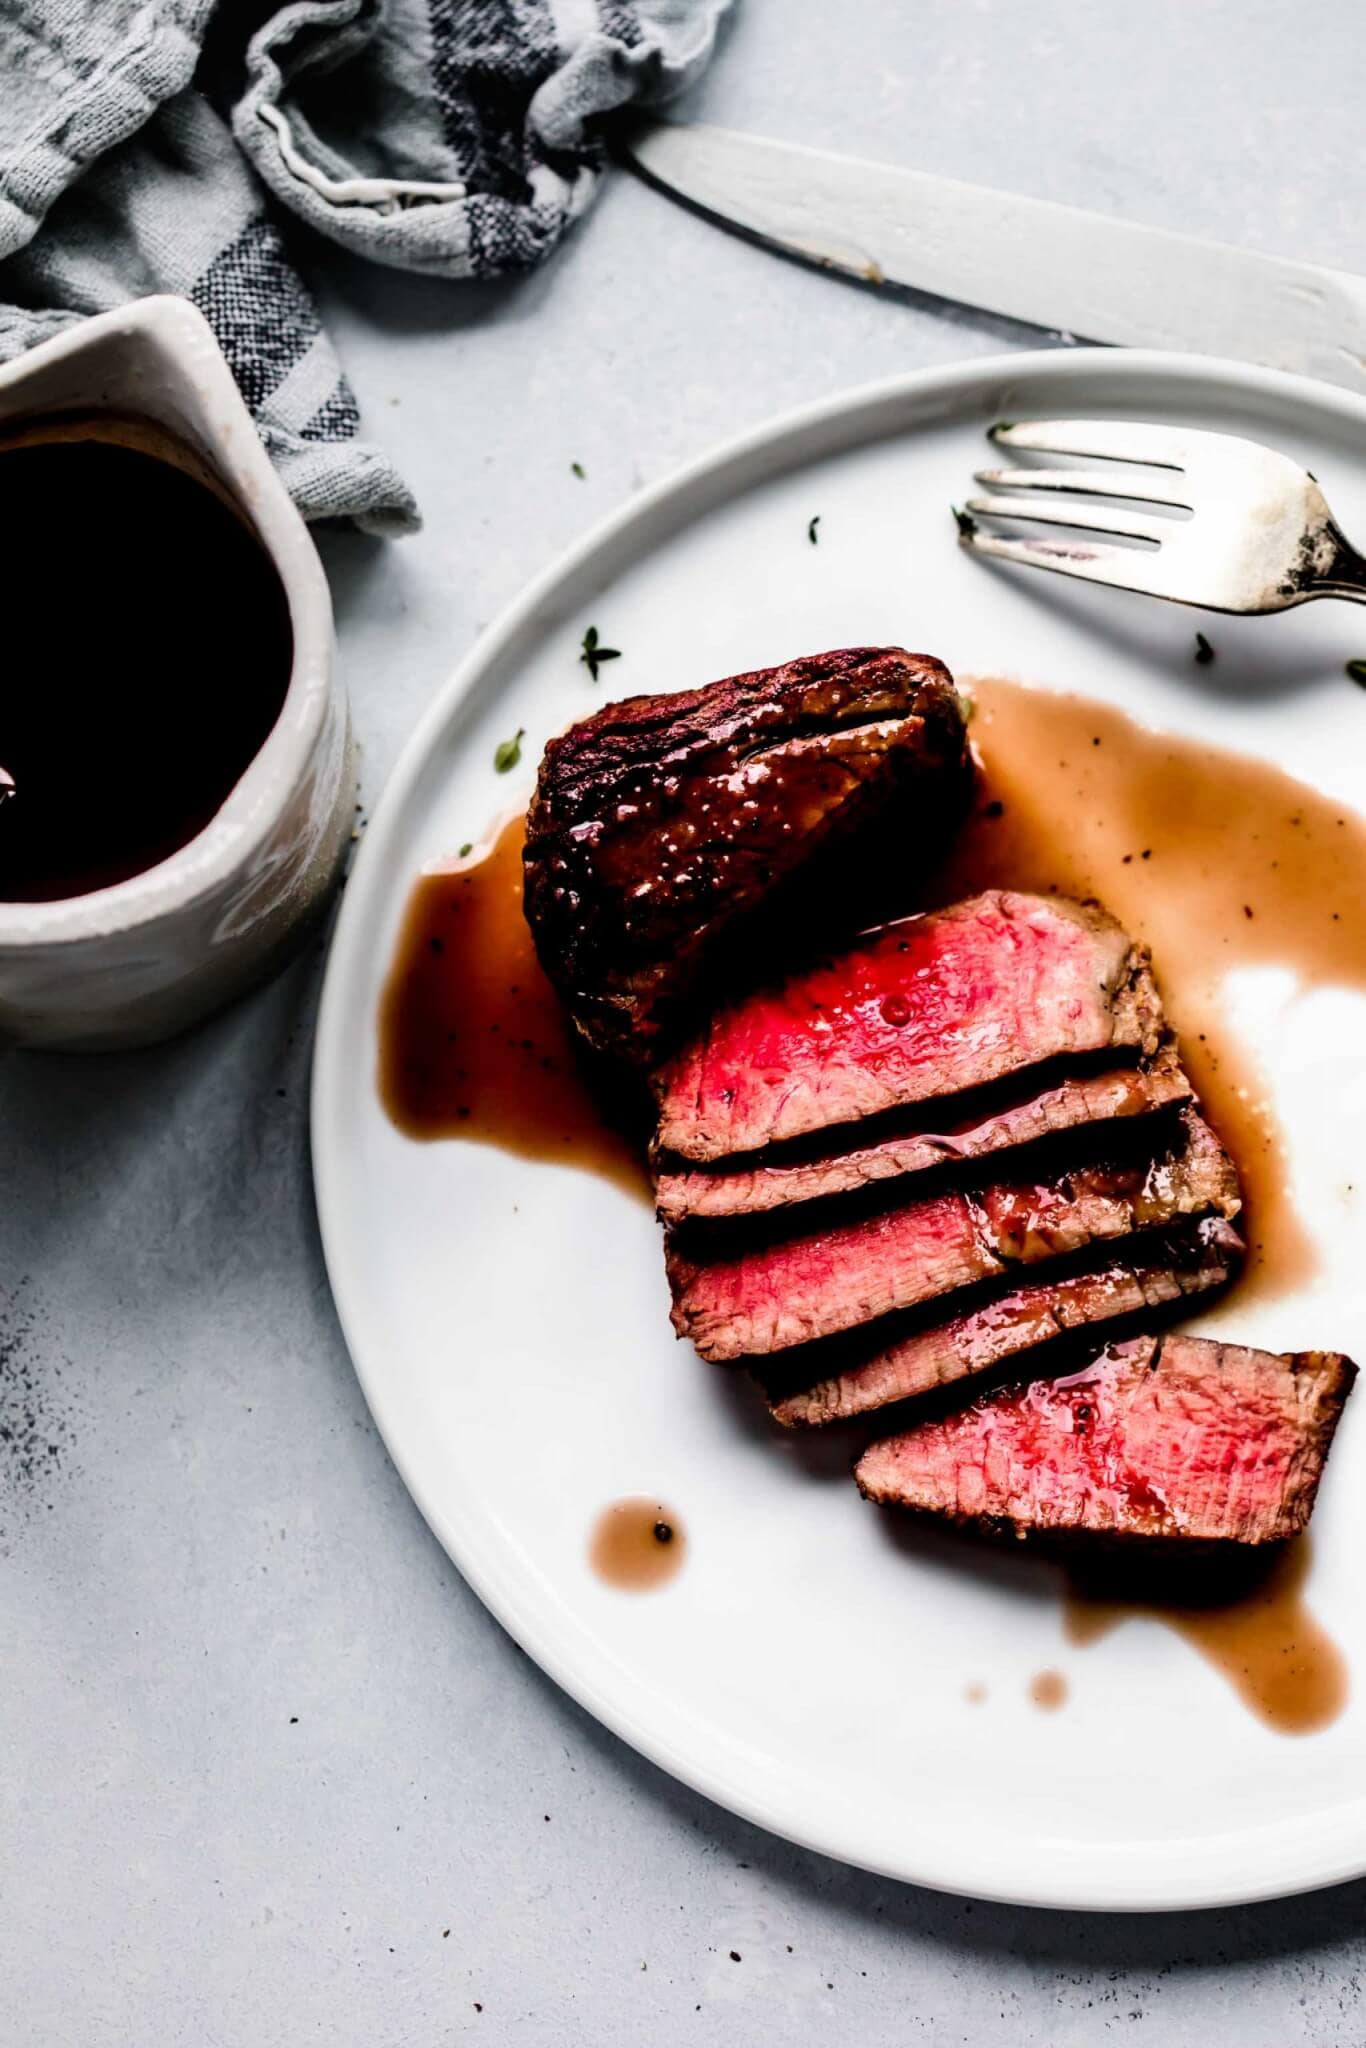 Steak drizzled with red wine jus.